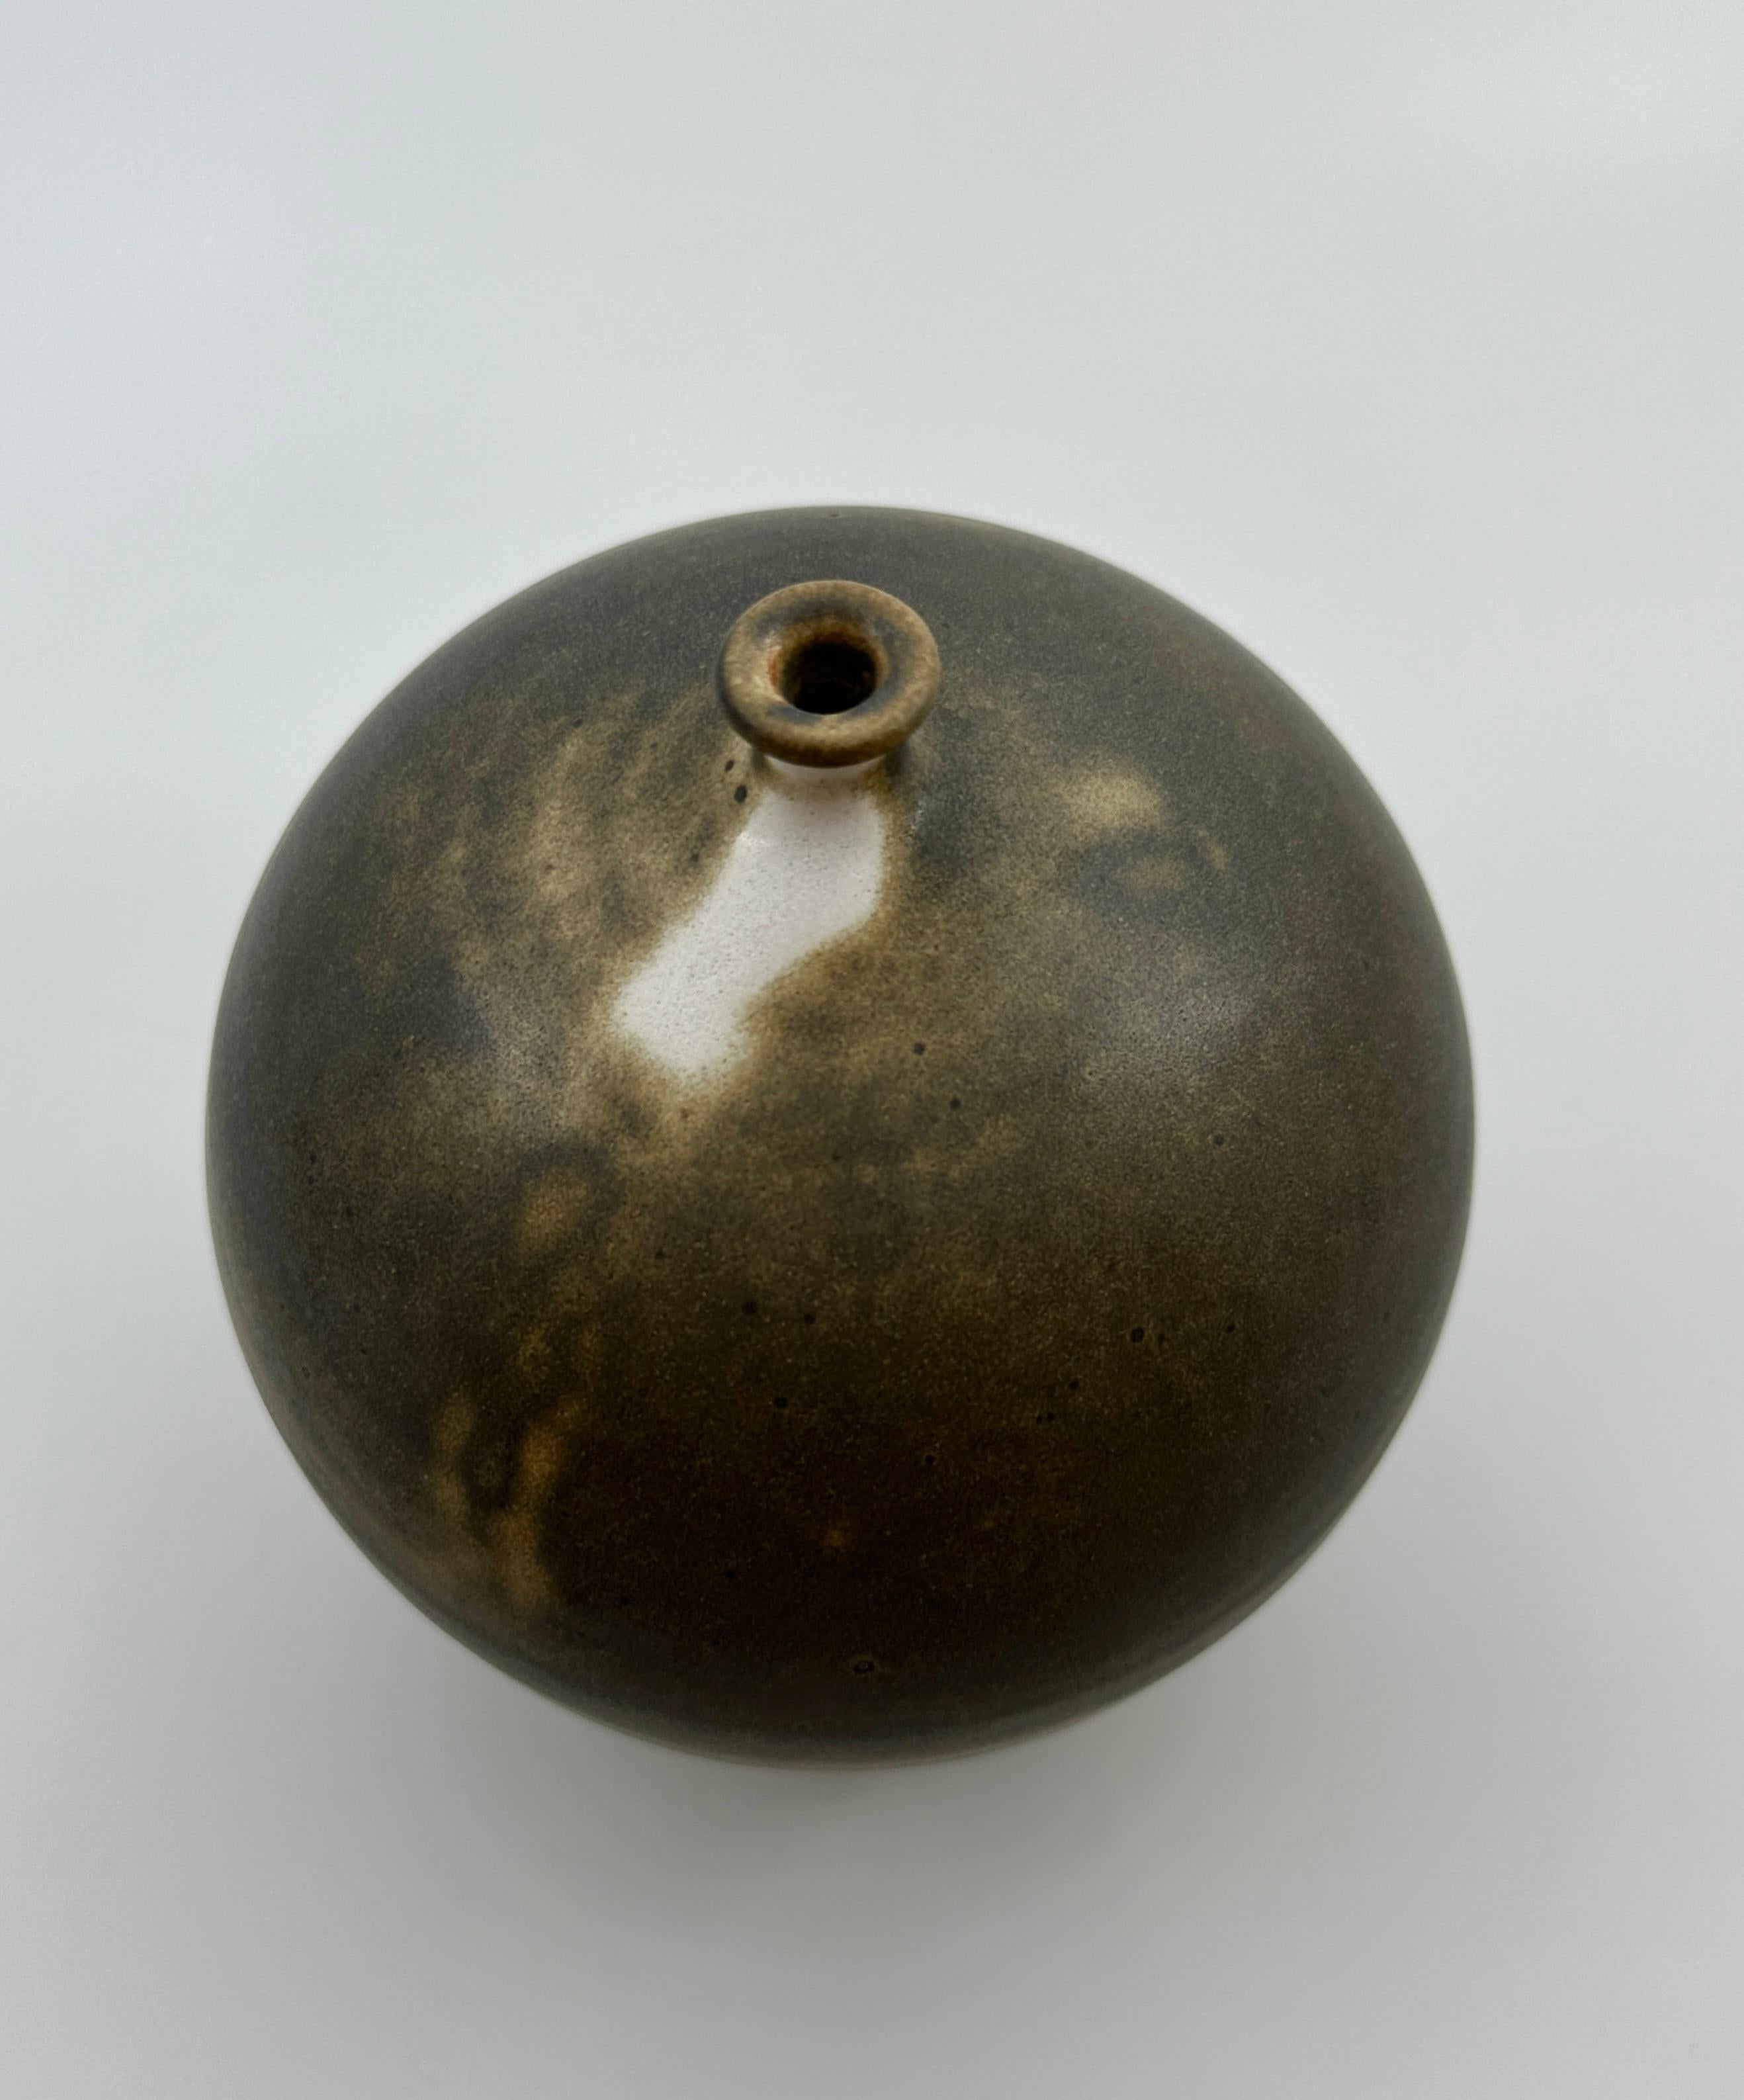 Turned Brown tiny neck vessel no. 35 For Sale